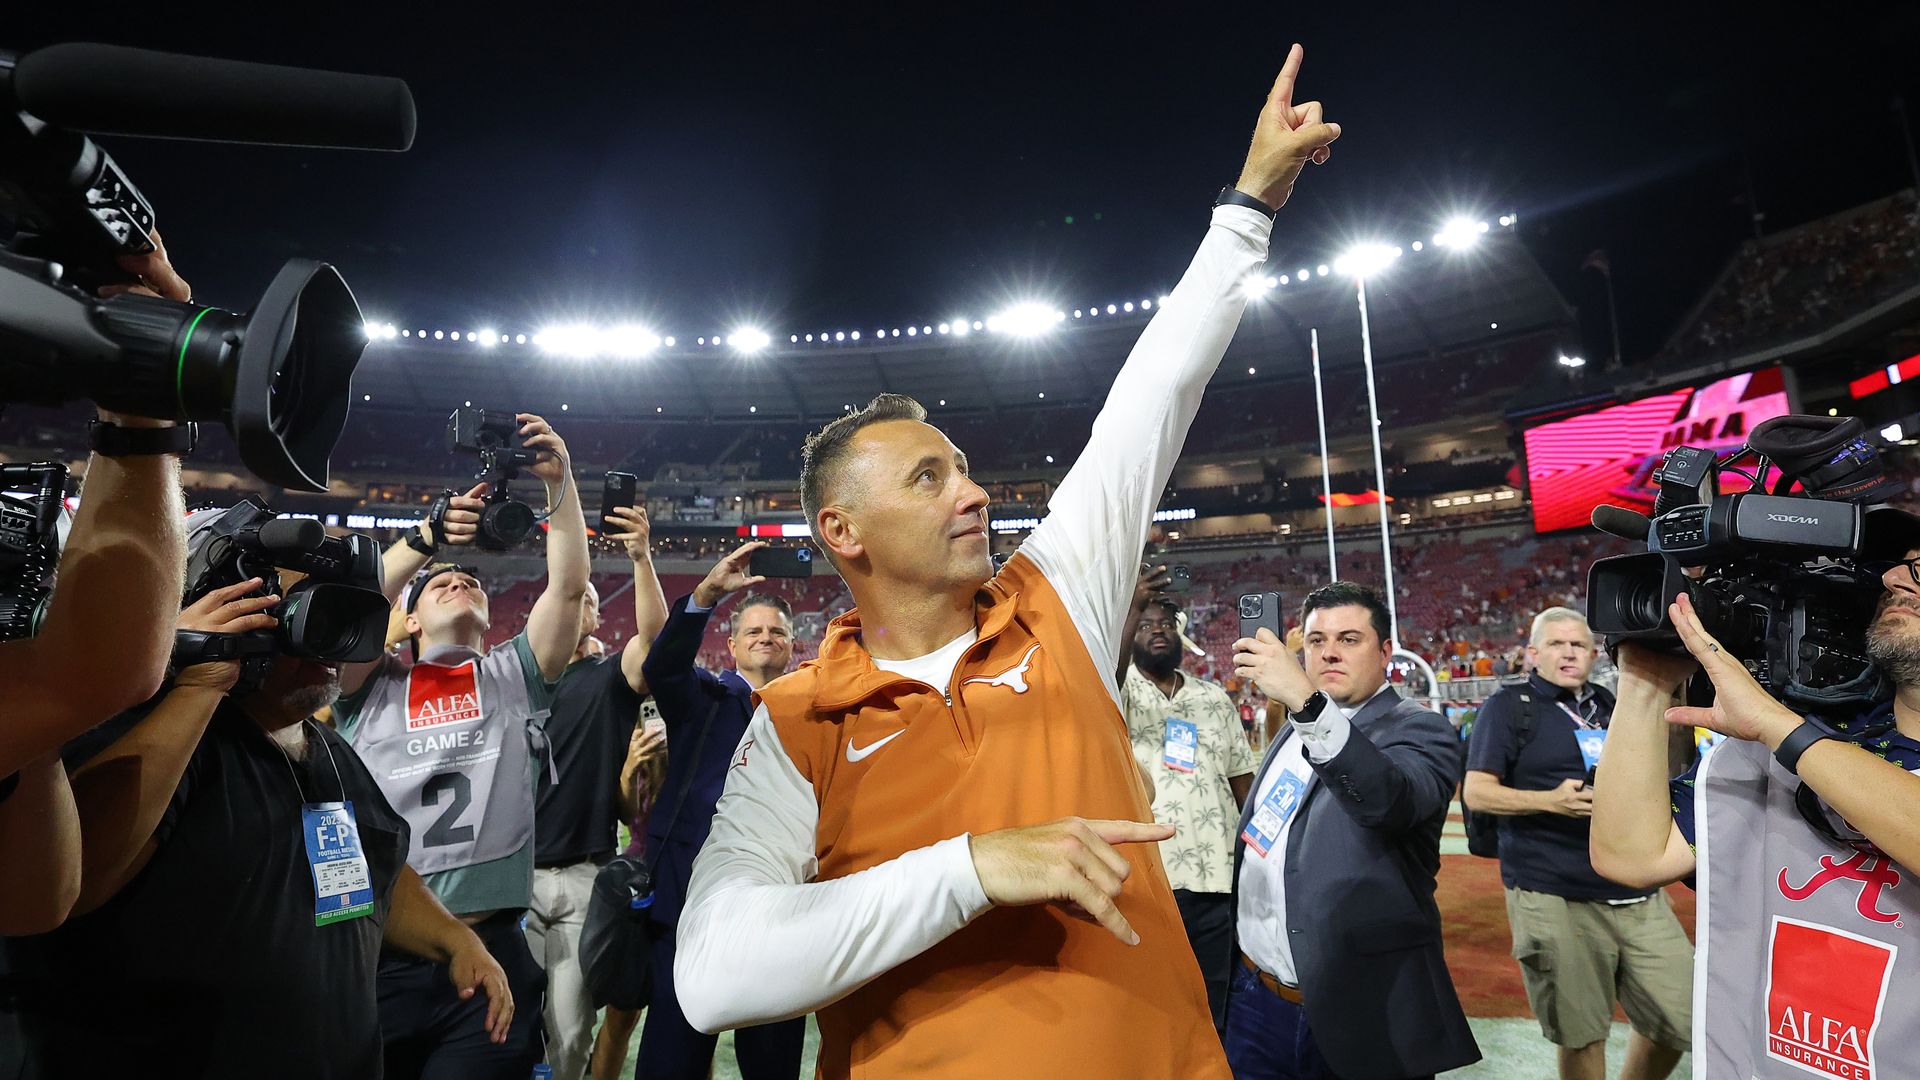 Steve Sarkisian gestures triumphantly to a crowd.